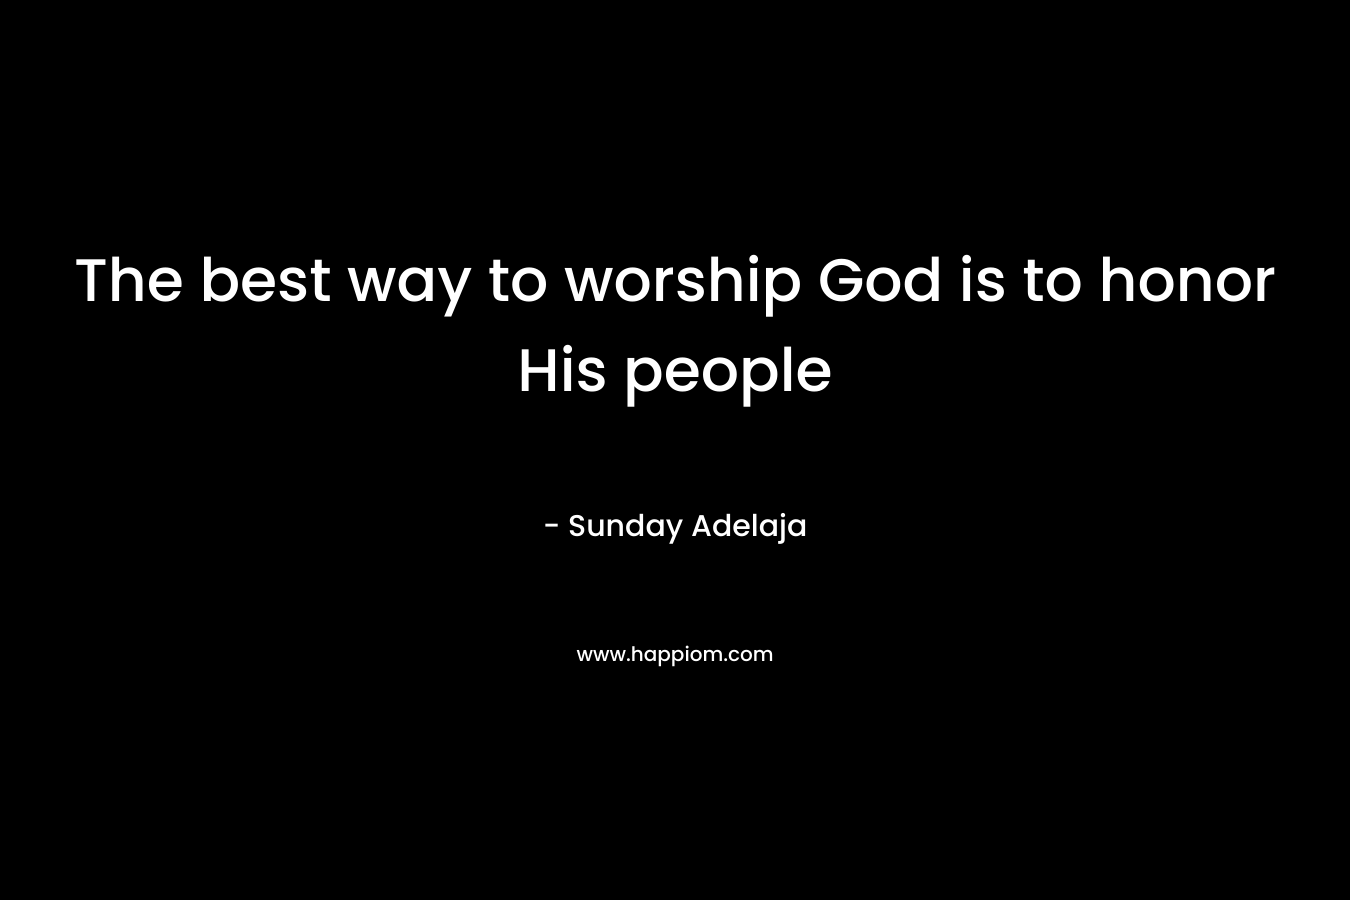 The best way to worship God is to honor His people